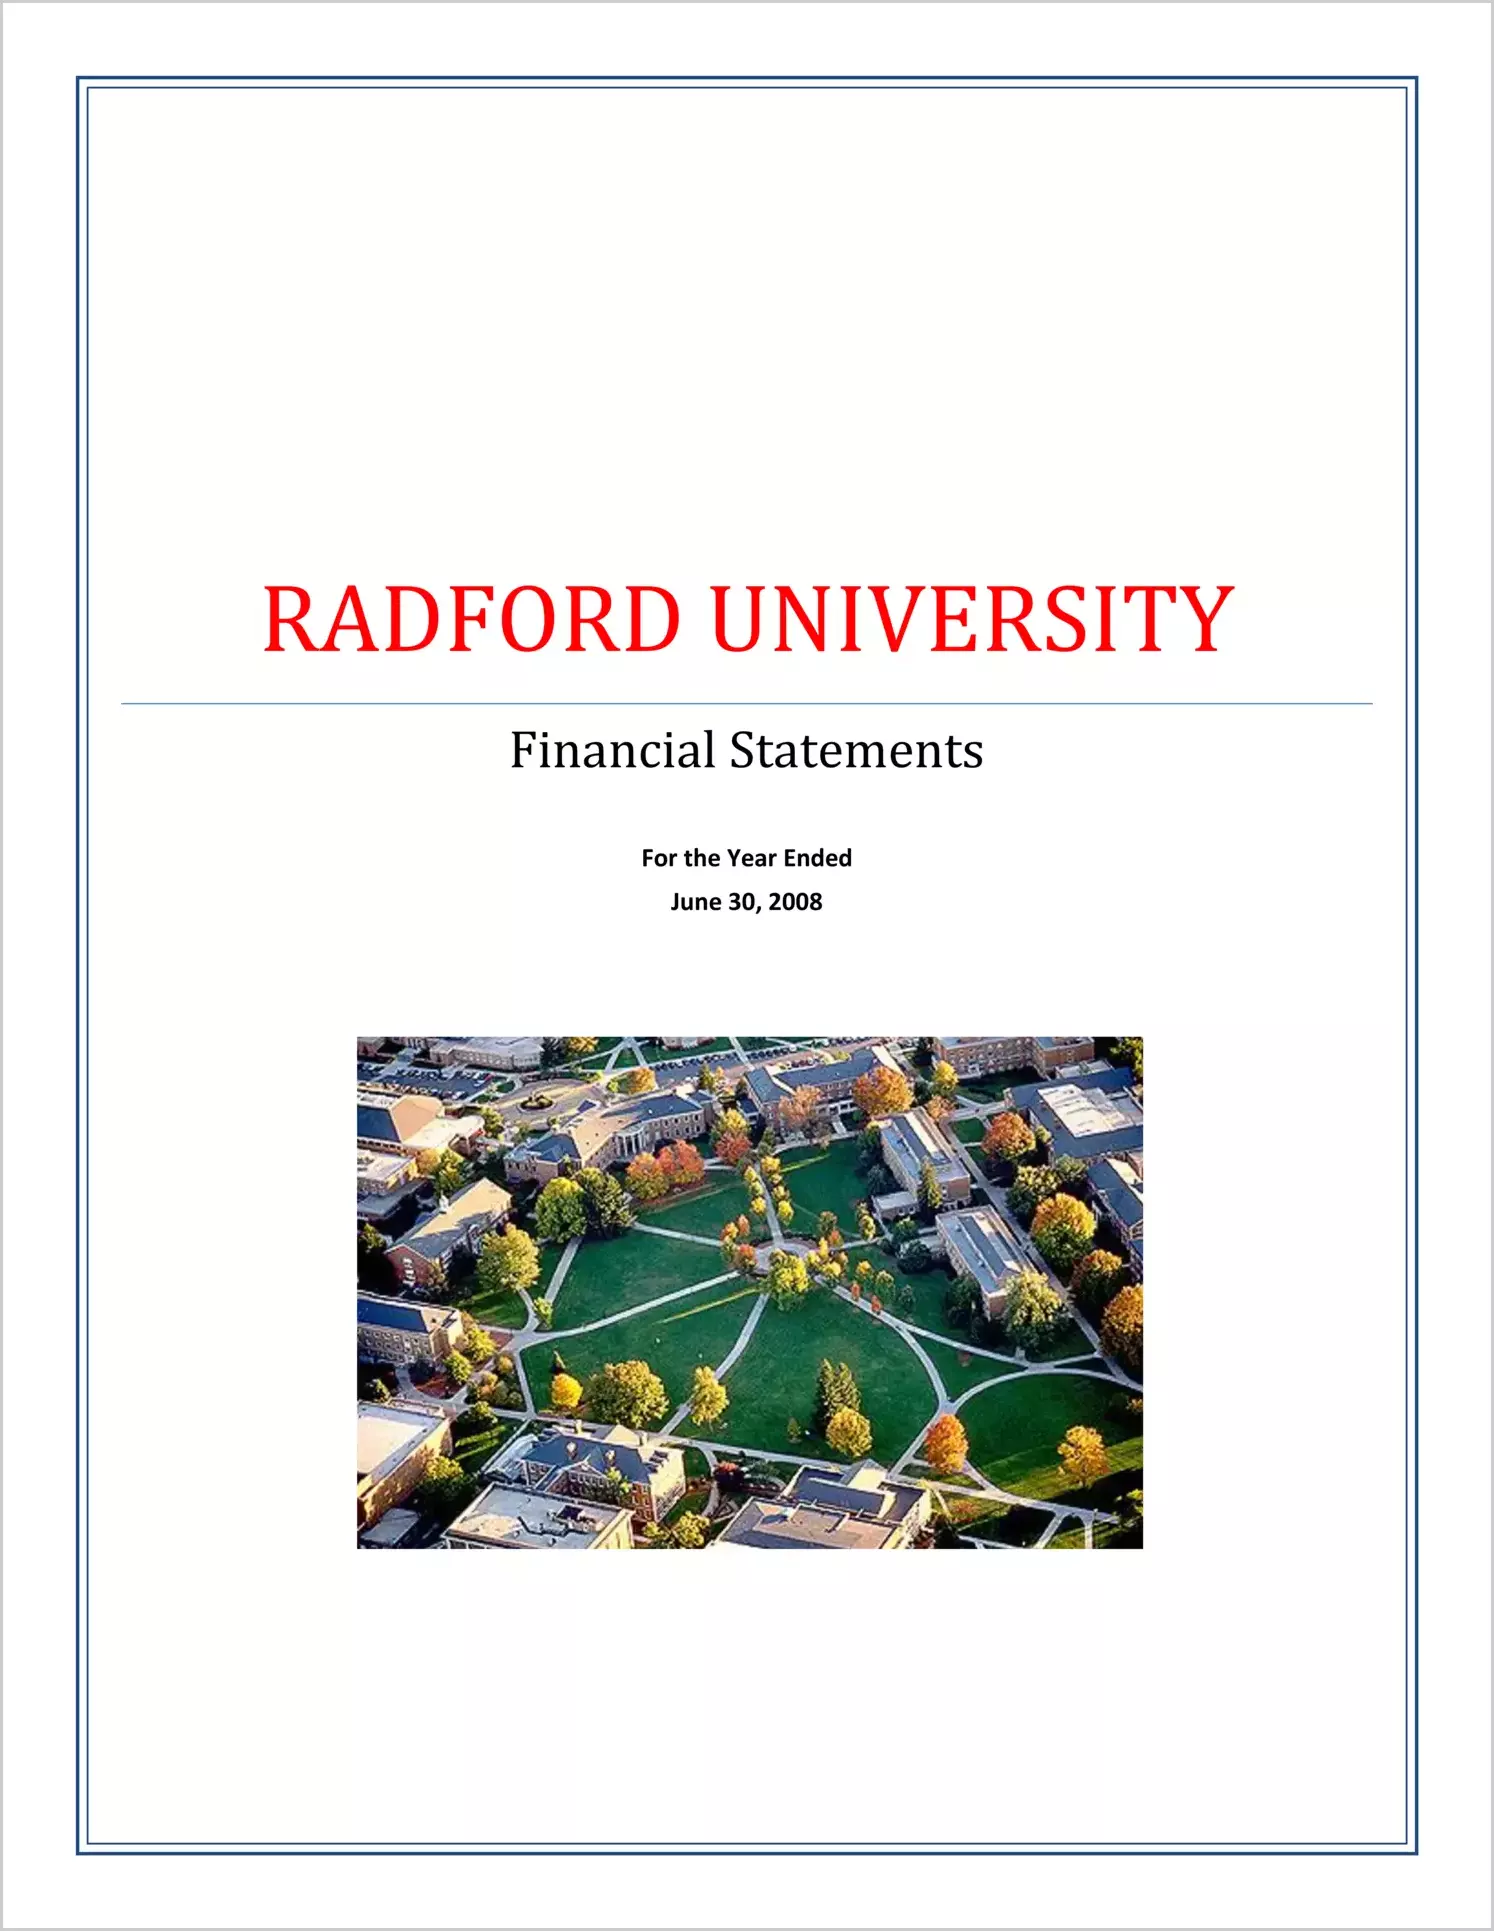 Radford University Finanical Statements report on Audit for the year ended June 30, 2008